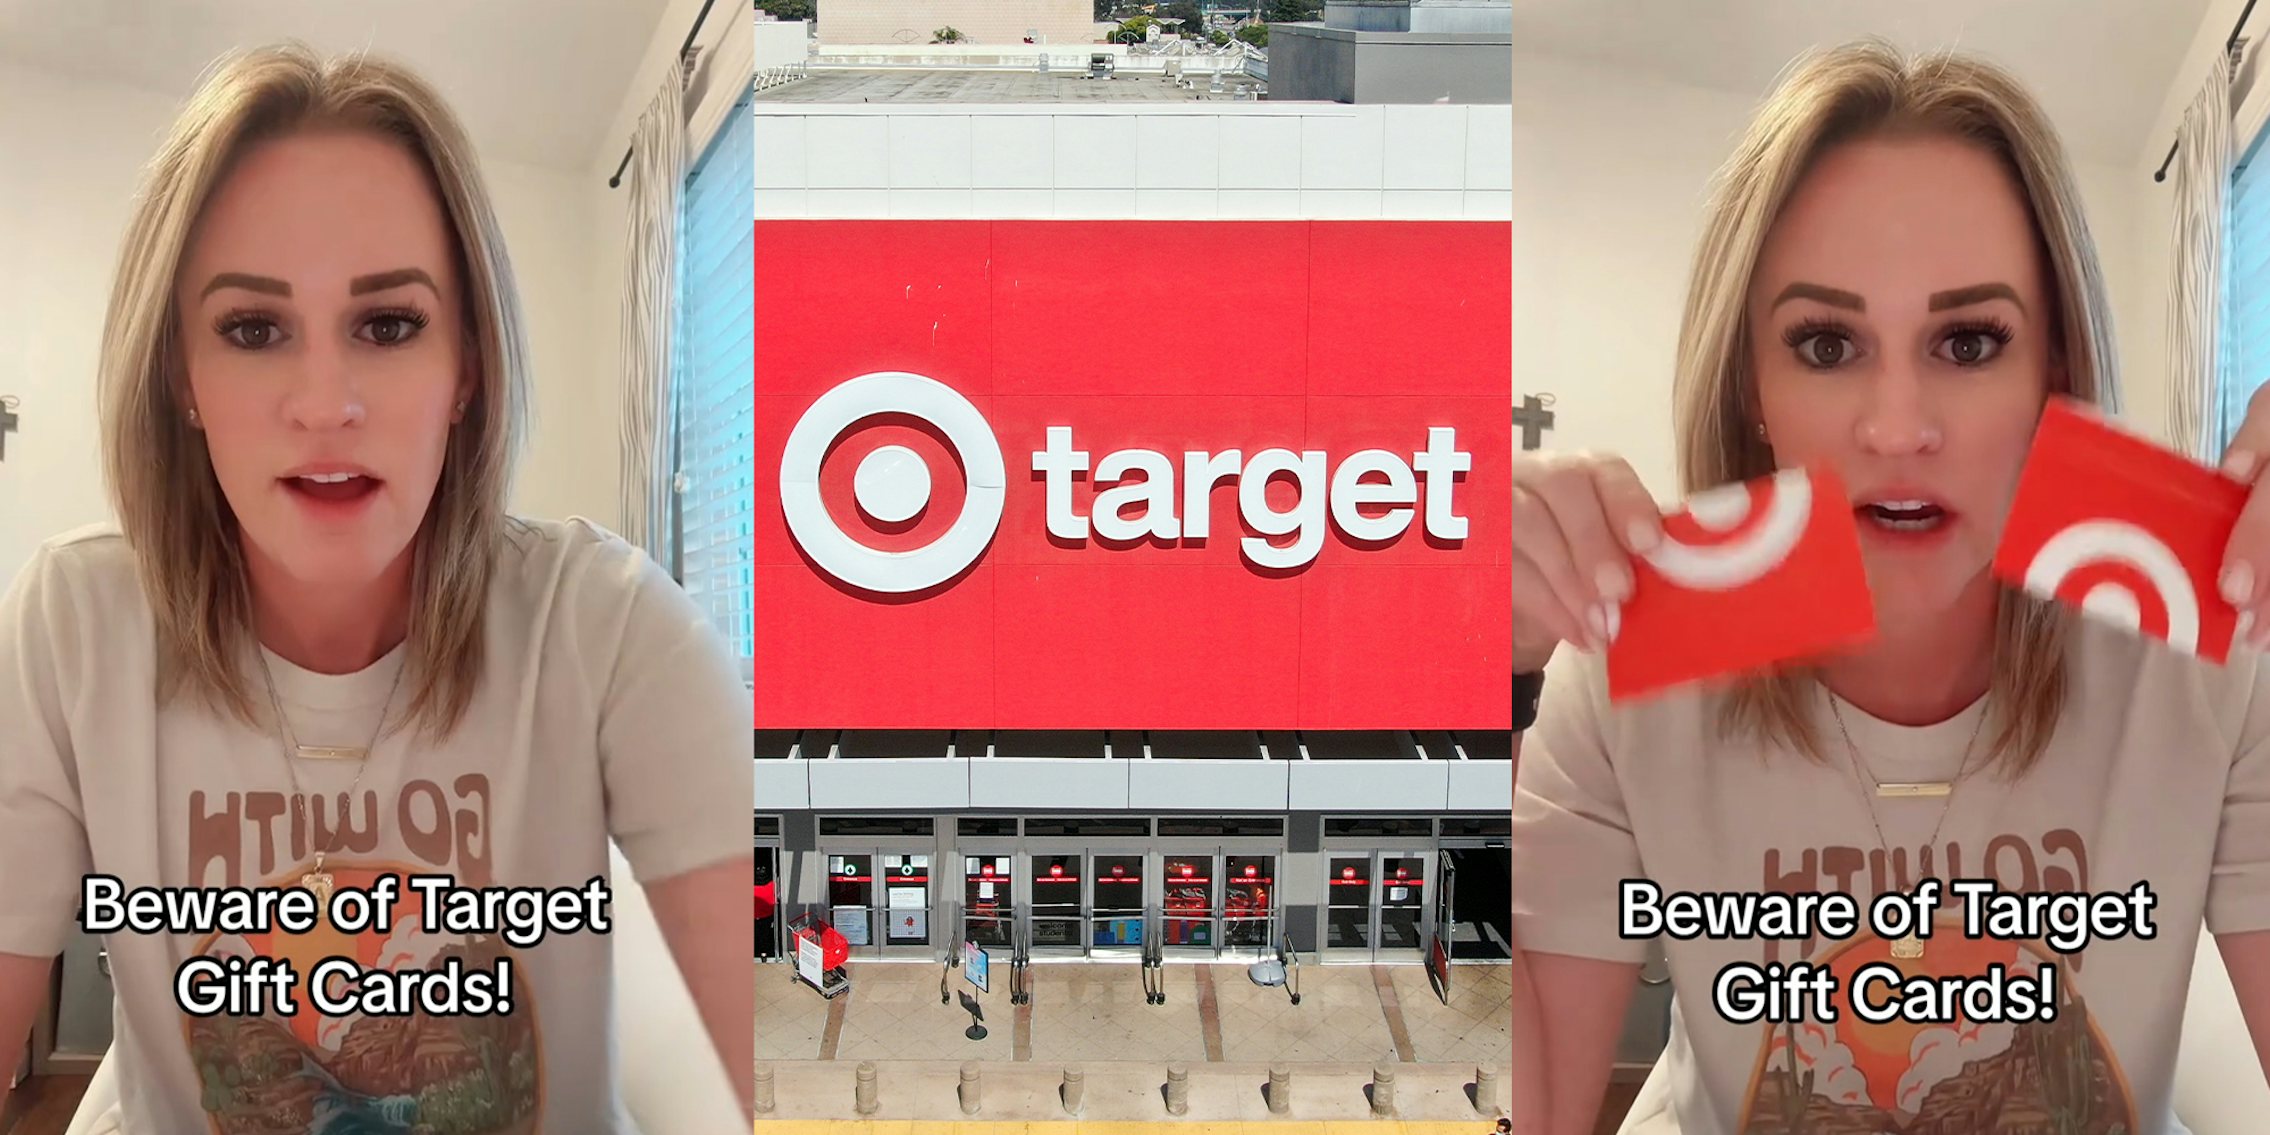 ‘Do not trust Target gift cards’